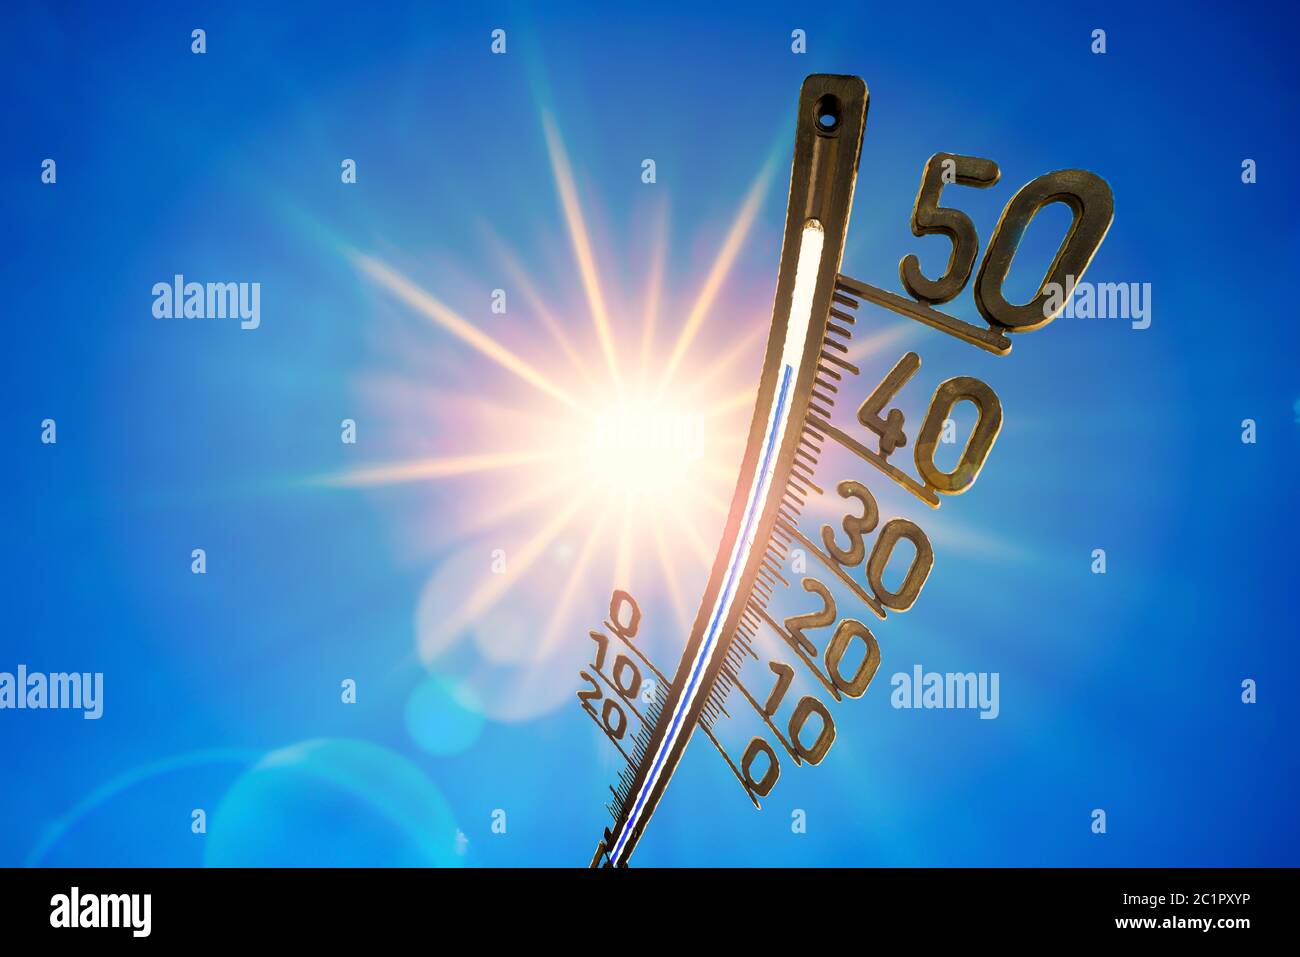 Hot summer or heat wave background, bright sun on blue sky with thermometer Stock Photo